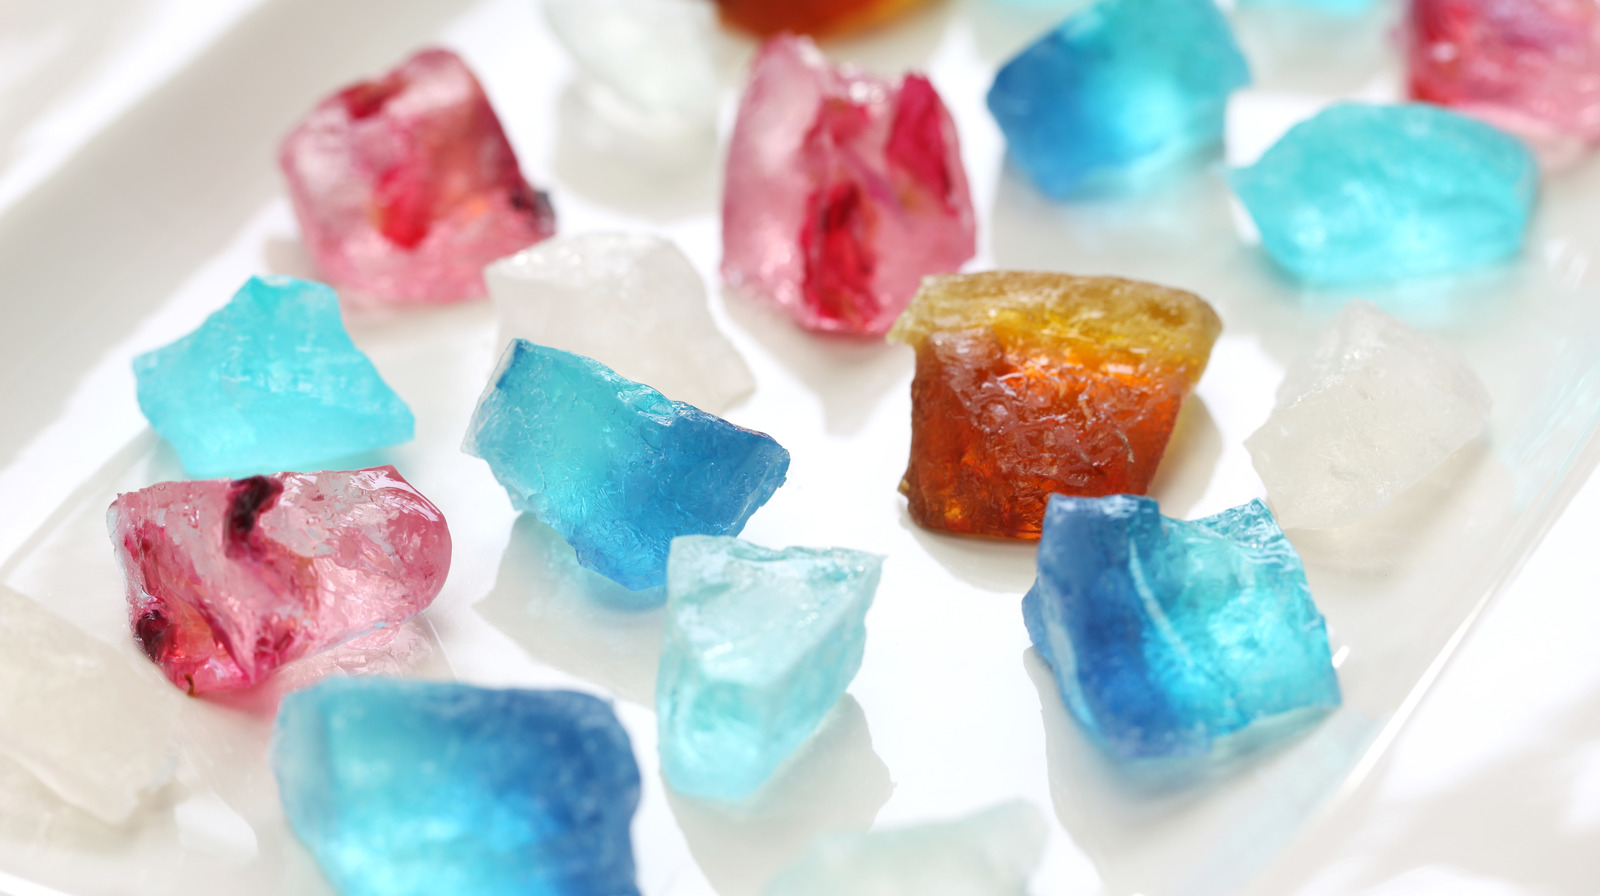 Kohakutou, The Sweet And Sparkly Edible Crystal Candies Redefining Crunch